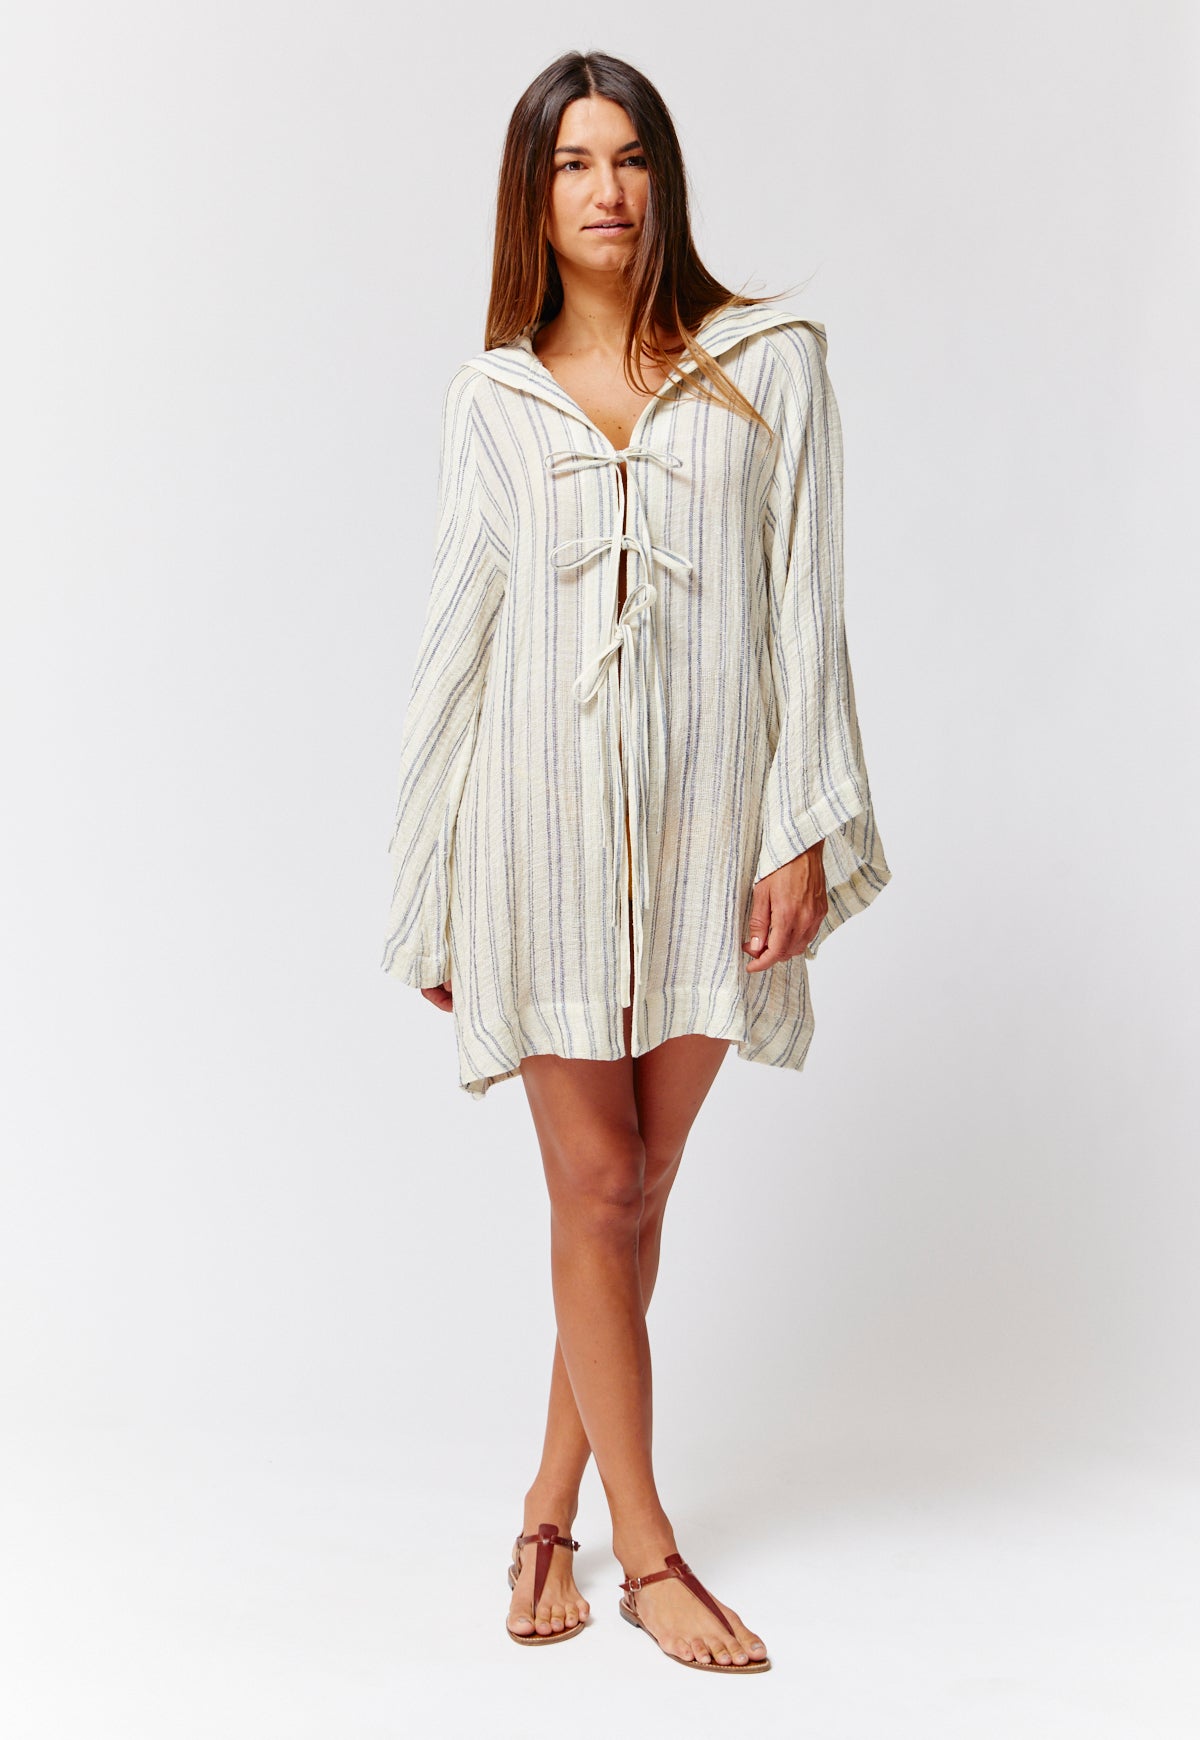 THE BEACH CAPE in NATURAL & NAVY STRIPED CHIOS GAUZE